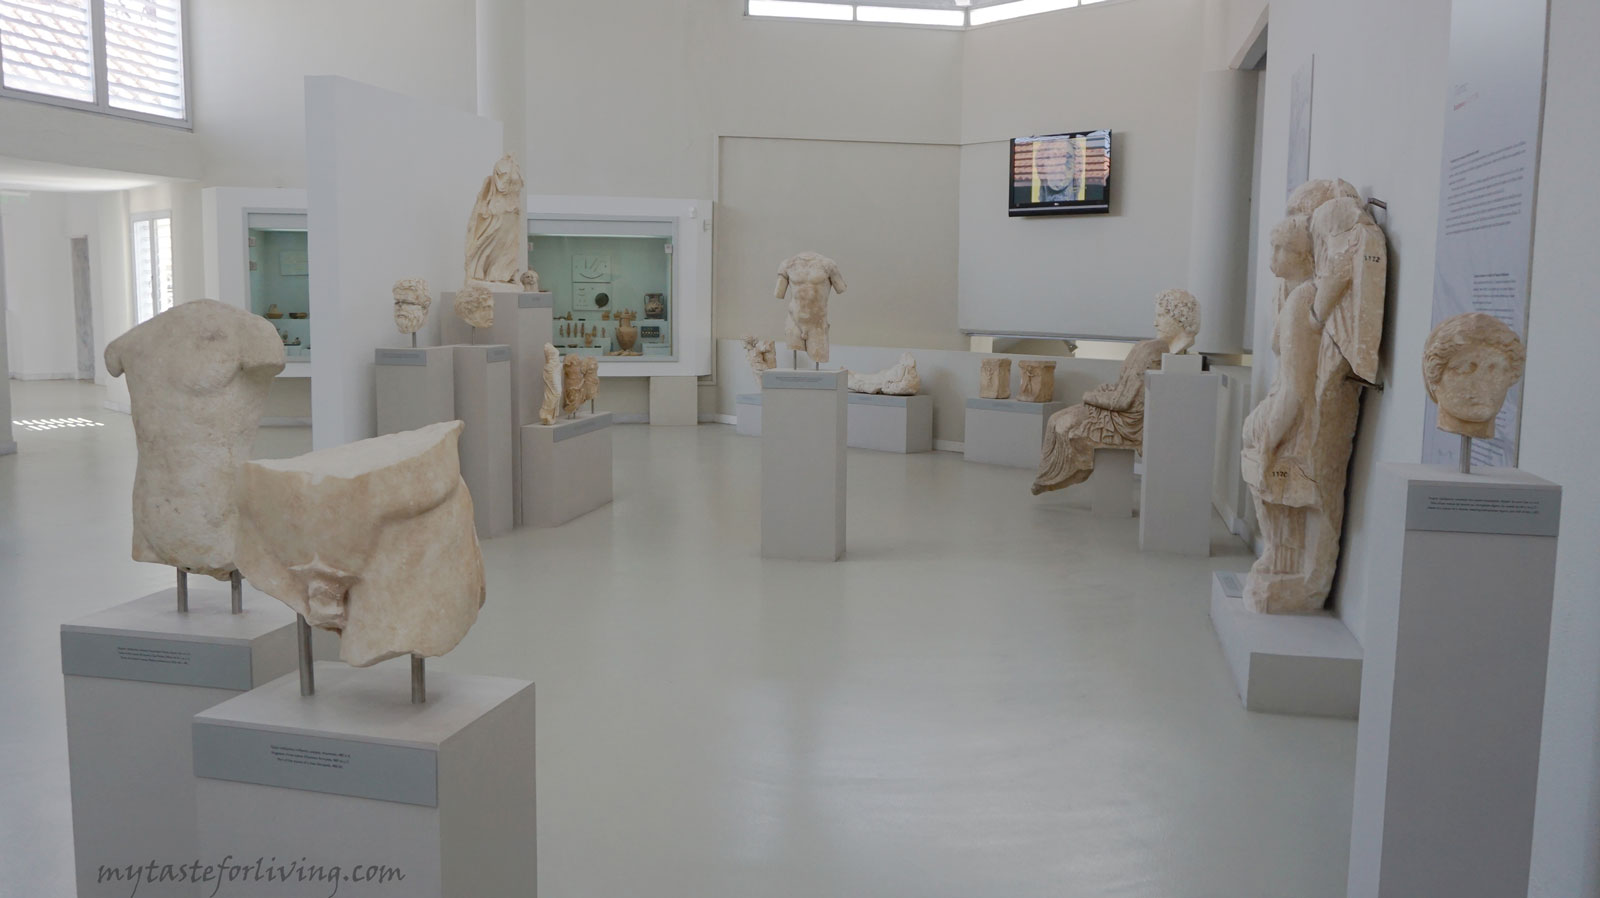 The Archaeological Museum of Thassos is a museum located in the town of Limenas in Thassos and is one of the oldest museums in Greece. 